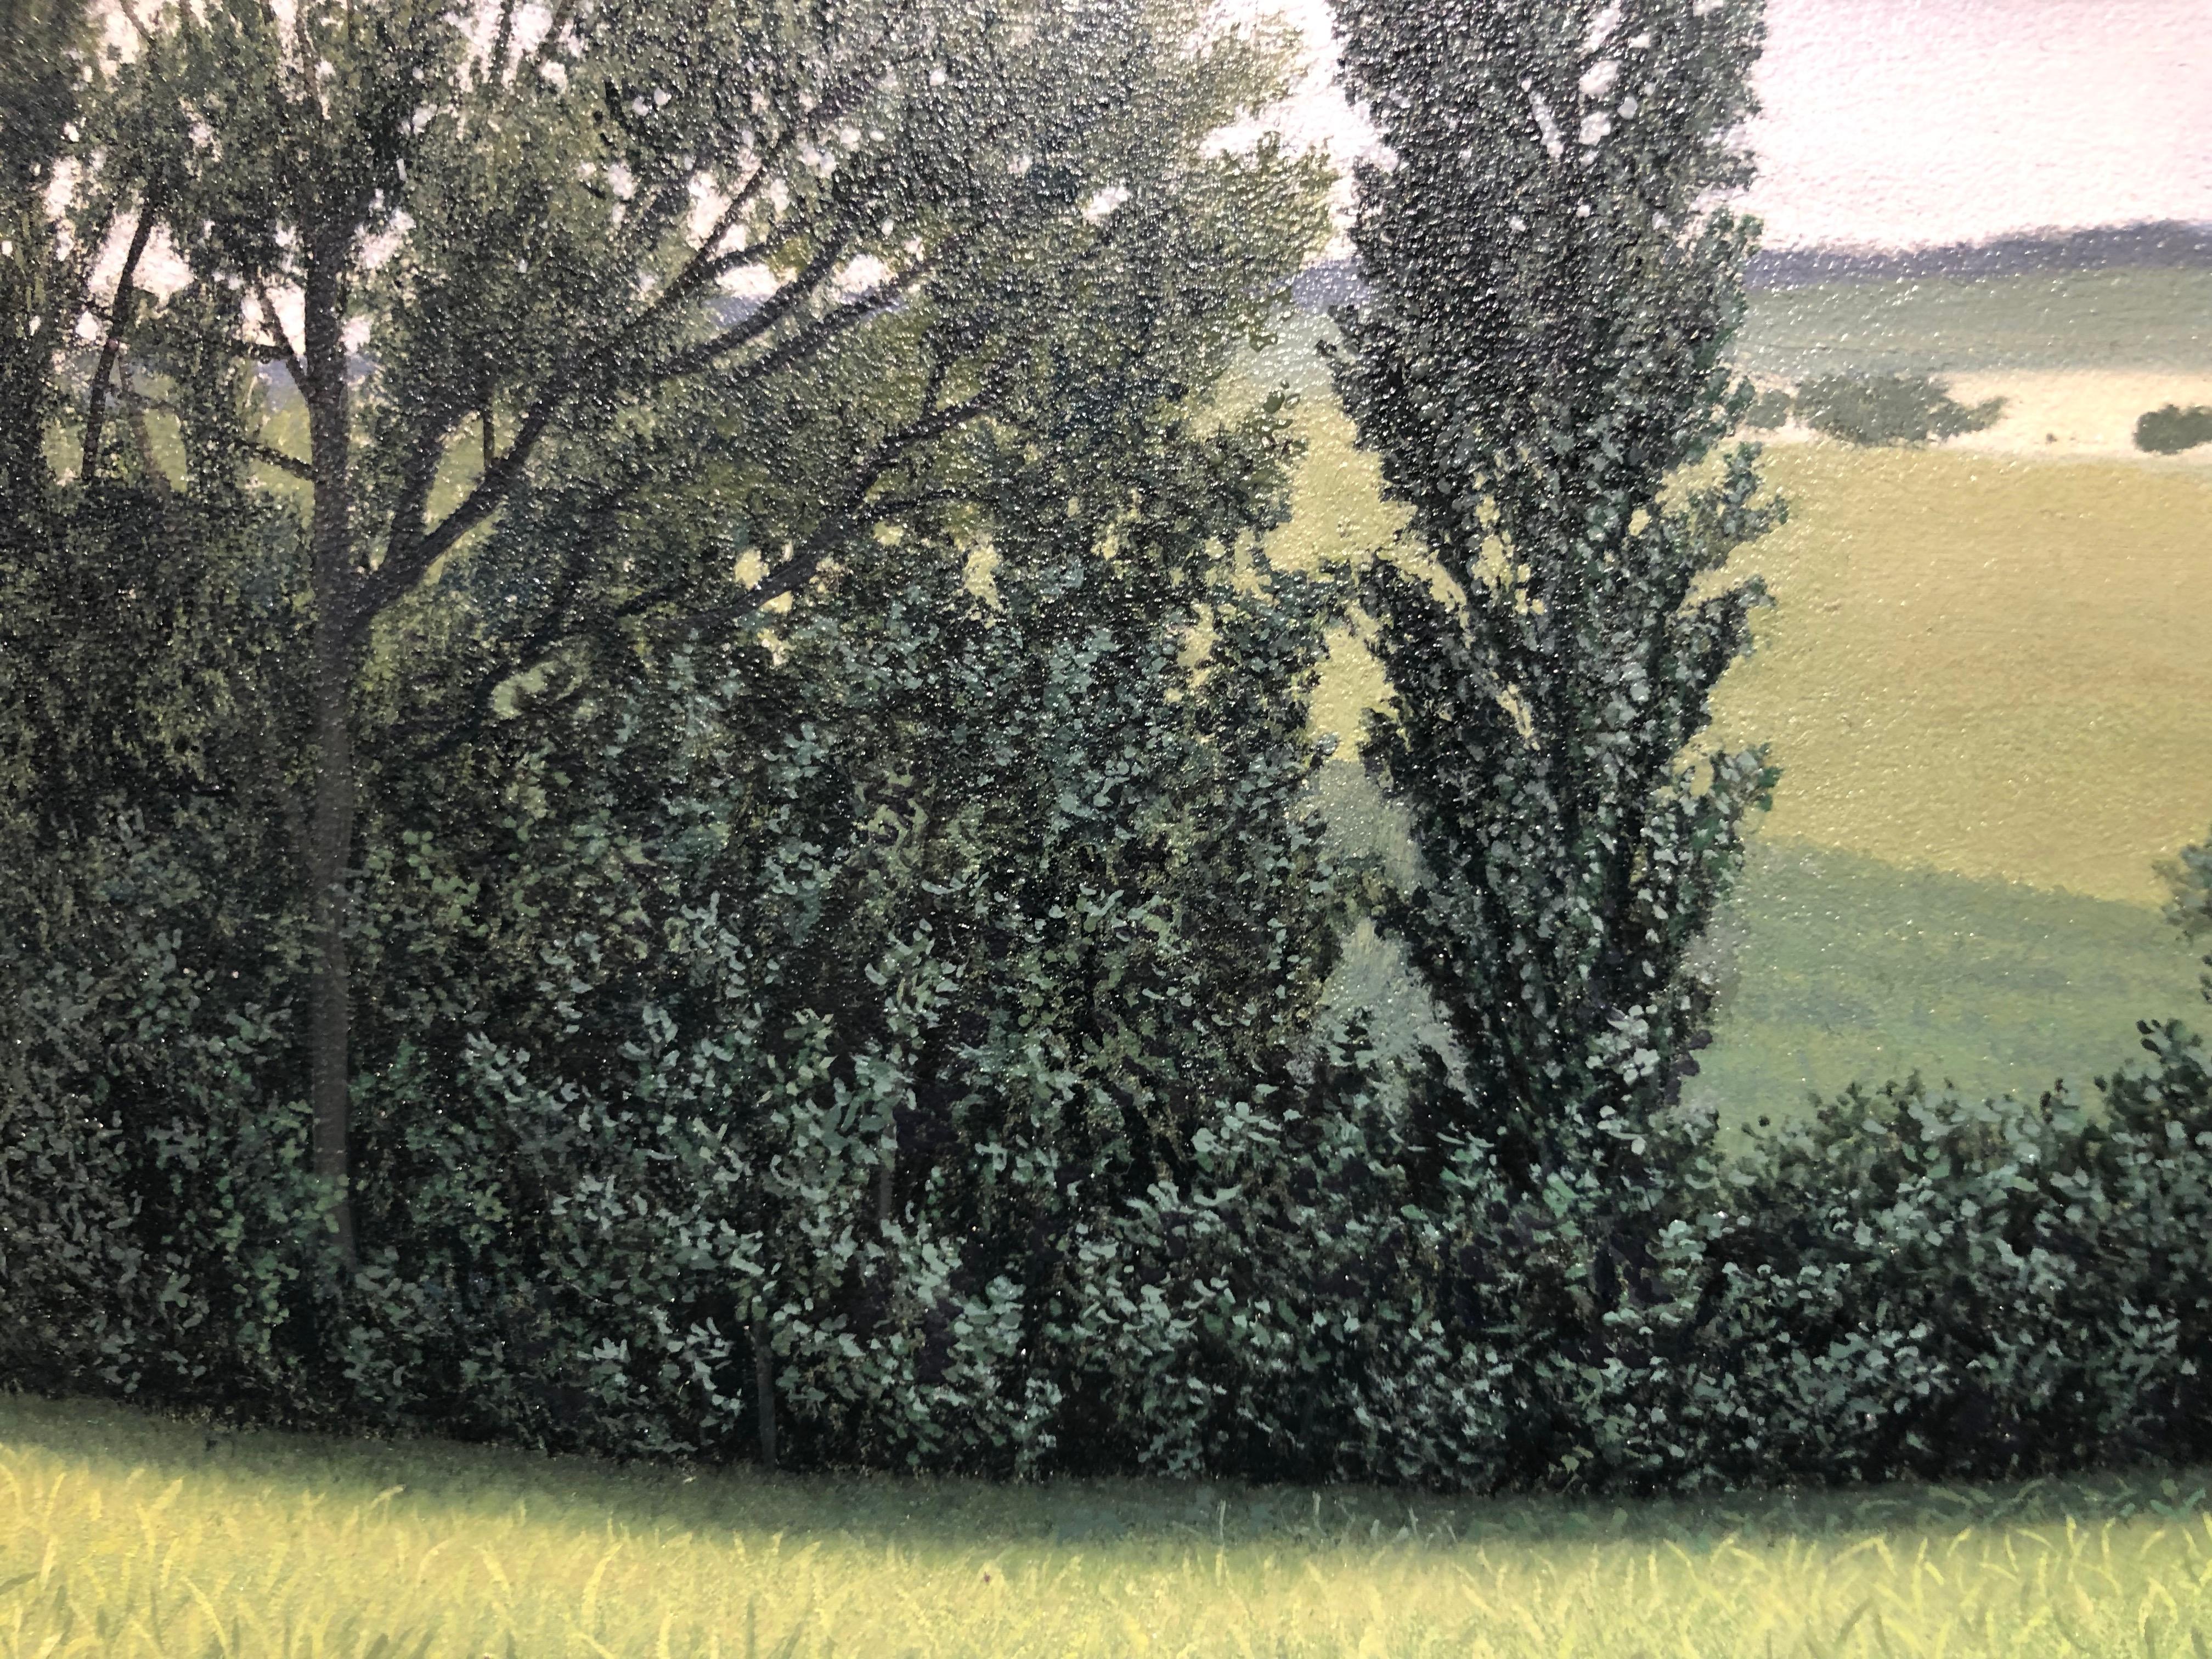 This small scale painting draws the viewer in with its painstaking detail.  Each leaf and blade of grass a rendered in tiny brush strokes making the painting feel much larger than it is.  Vivid greens project against the gray sky creating an almost